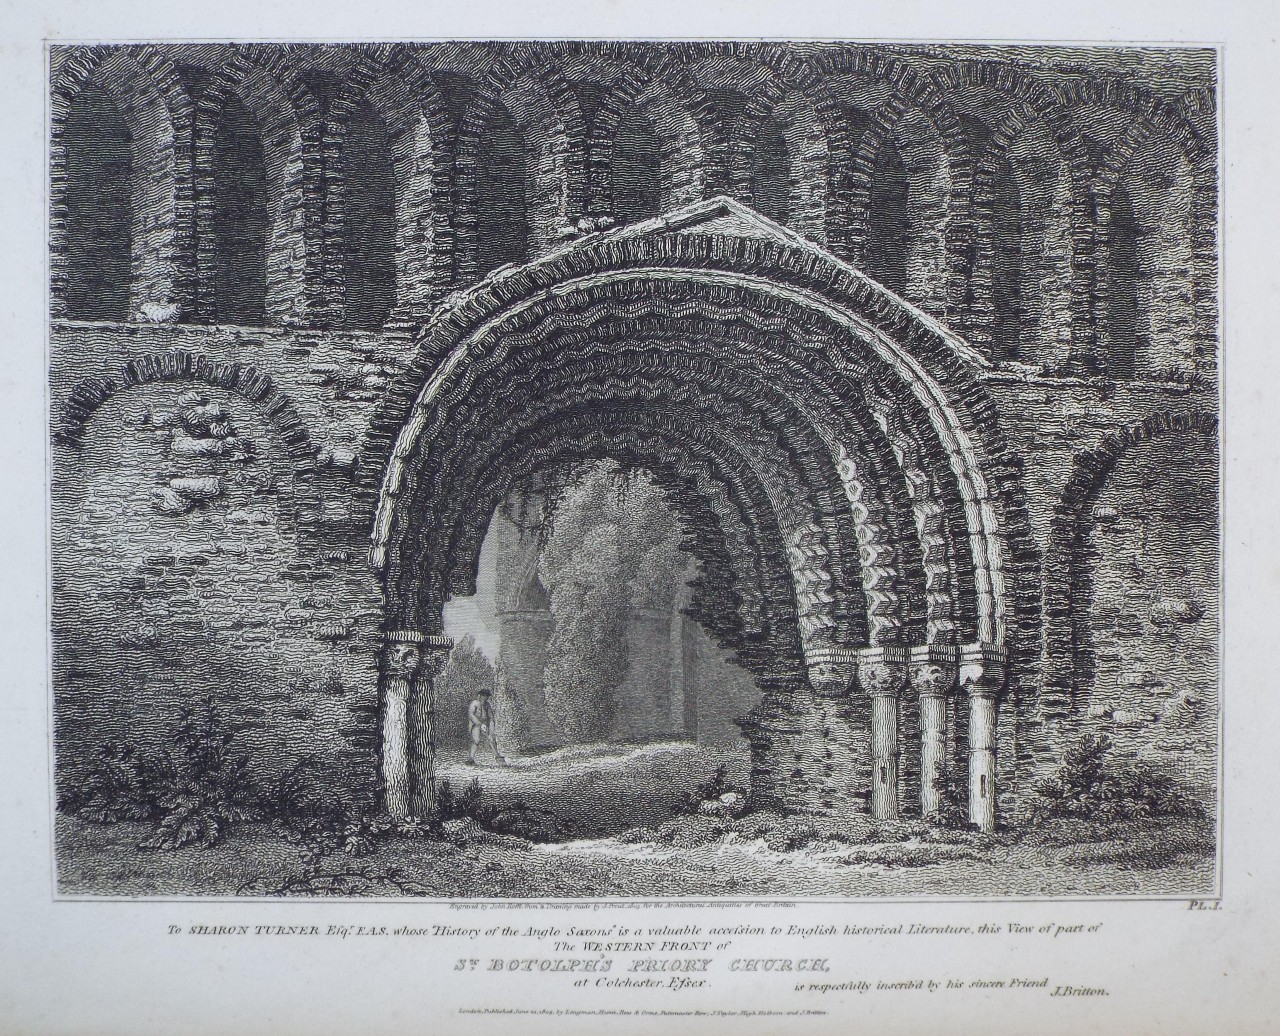 Print - The Western Front of St. Botolph's Priory Church, at Colchester, Essex. - Roffe